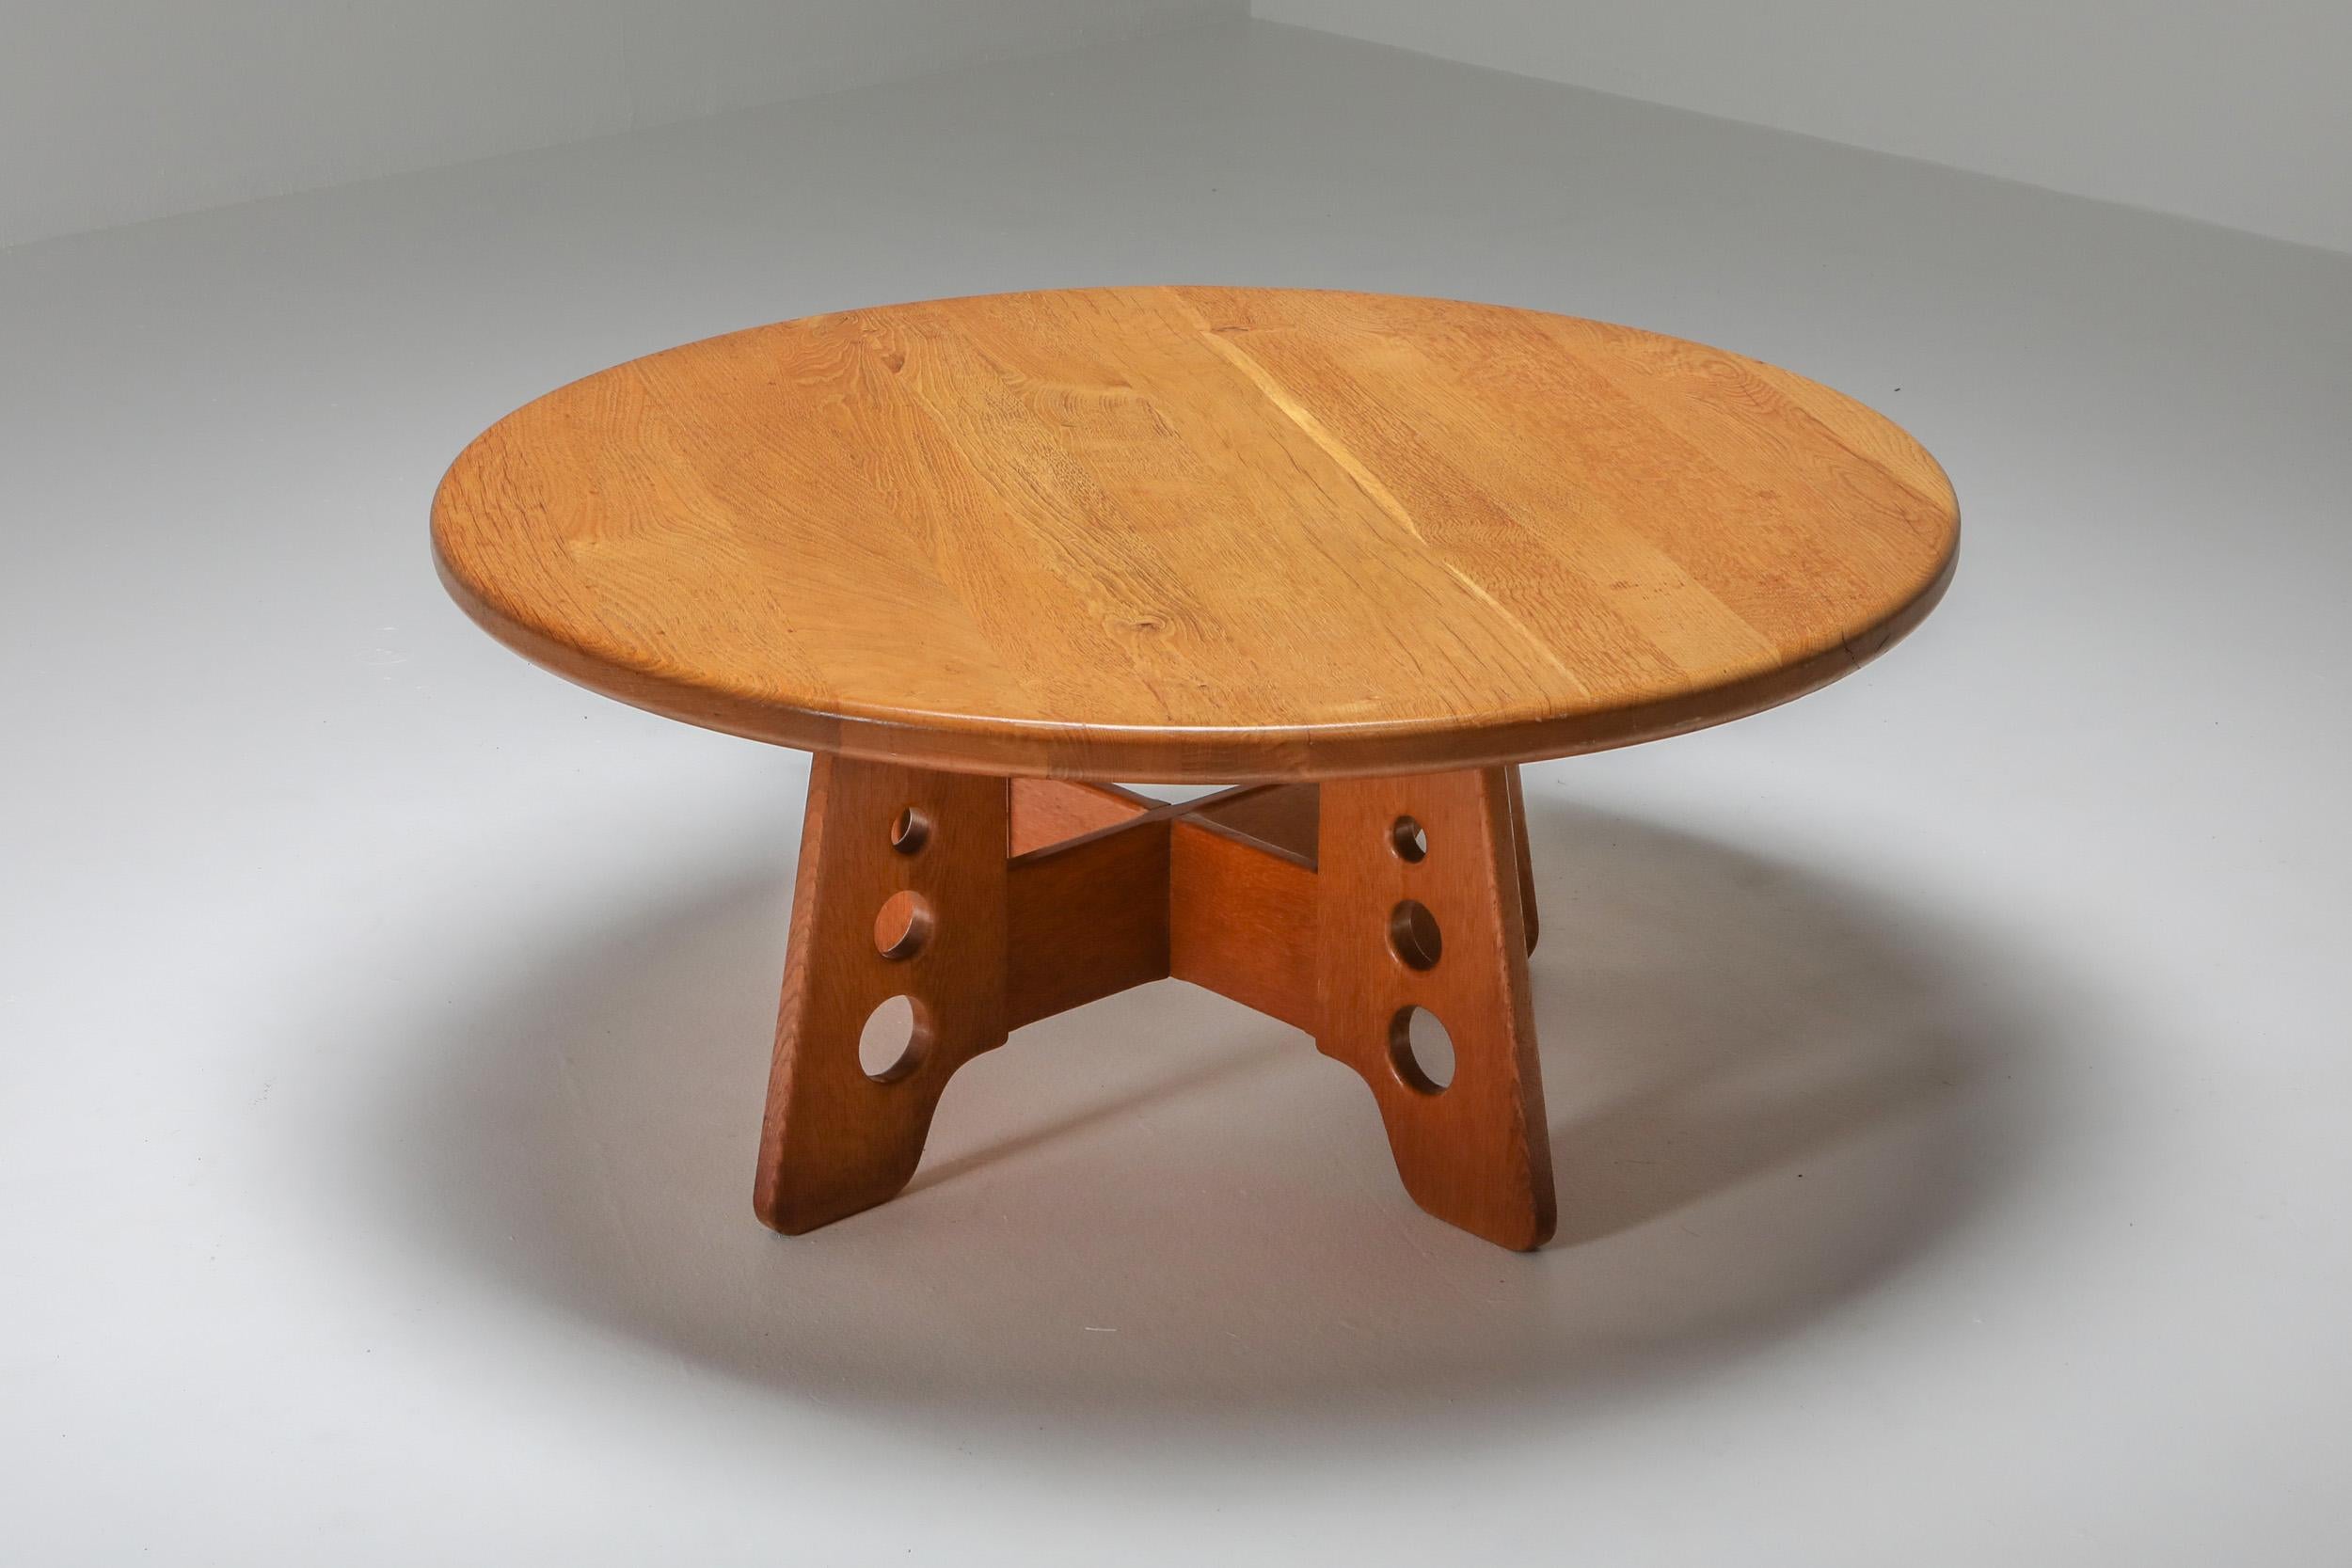 Oak coffee table, Mid-Century Modern, Gilbert Marklund for Furusnickarn AB, 1960s

Round topped coffee table in solid oak, trapezoid cross like base.
Naturalist wabi sabi feel. Would fit as well in an Axel Vervoordt inspired interior as in a more